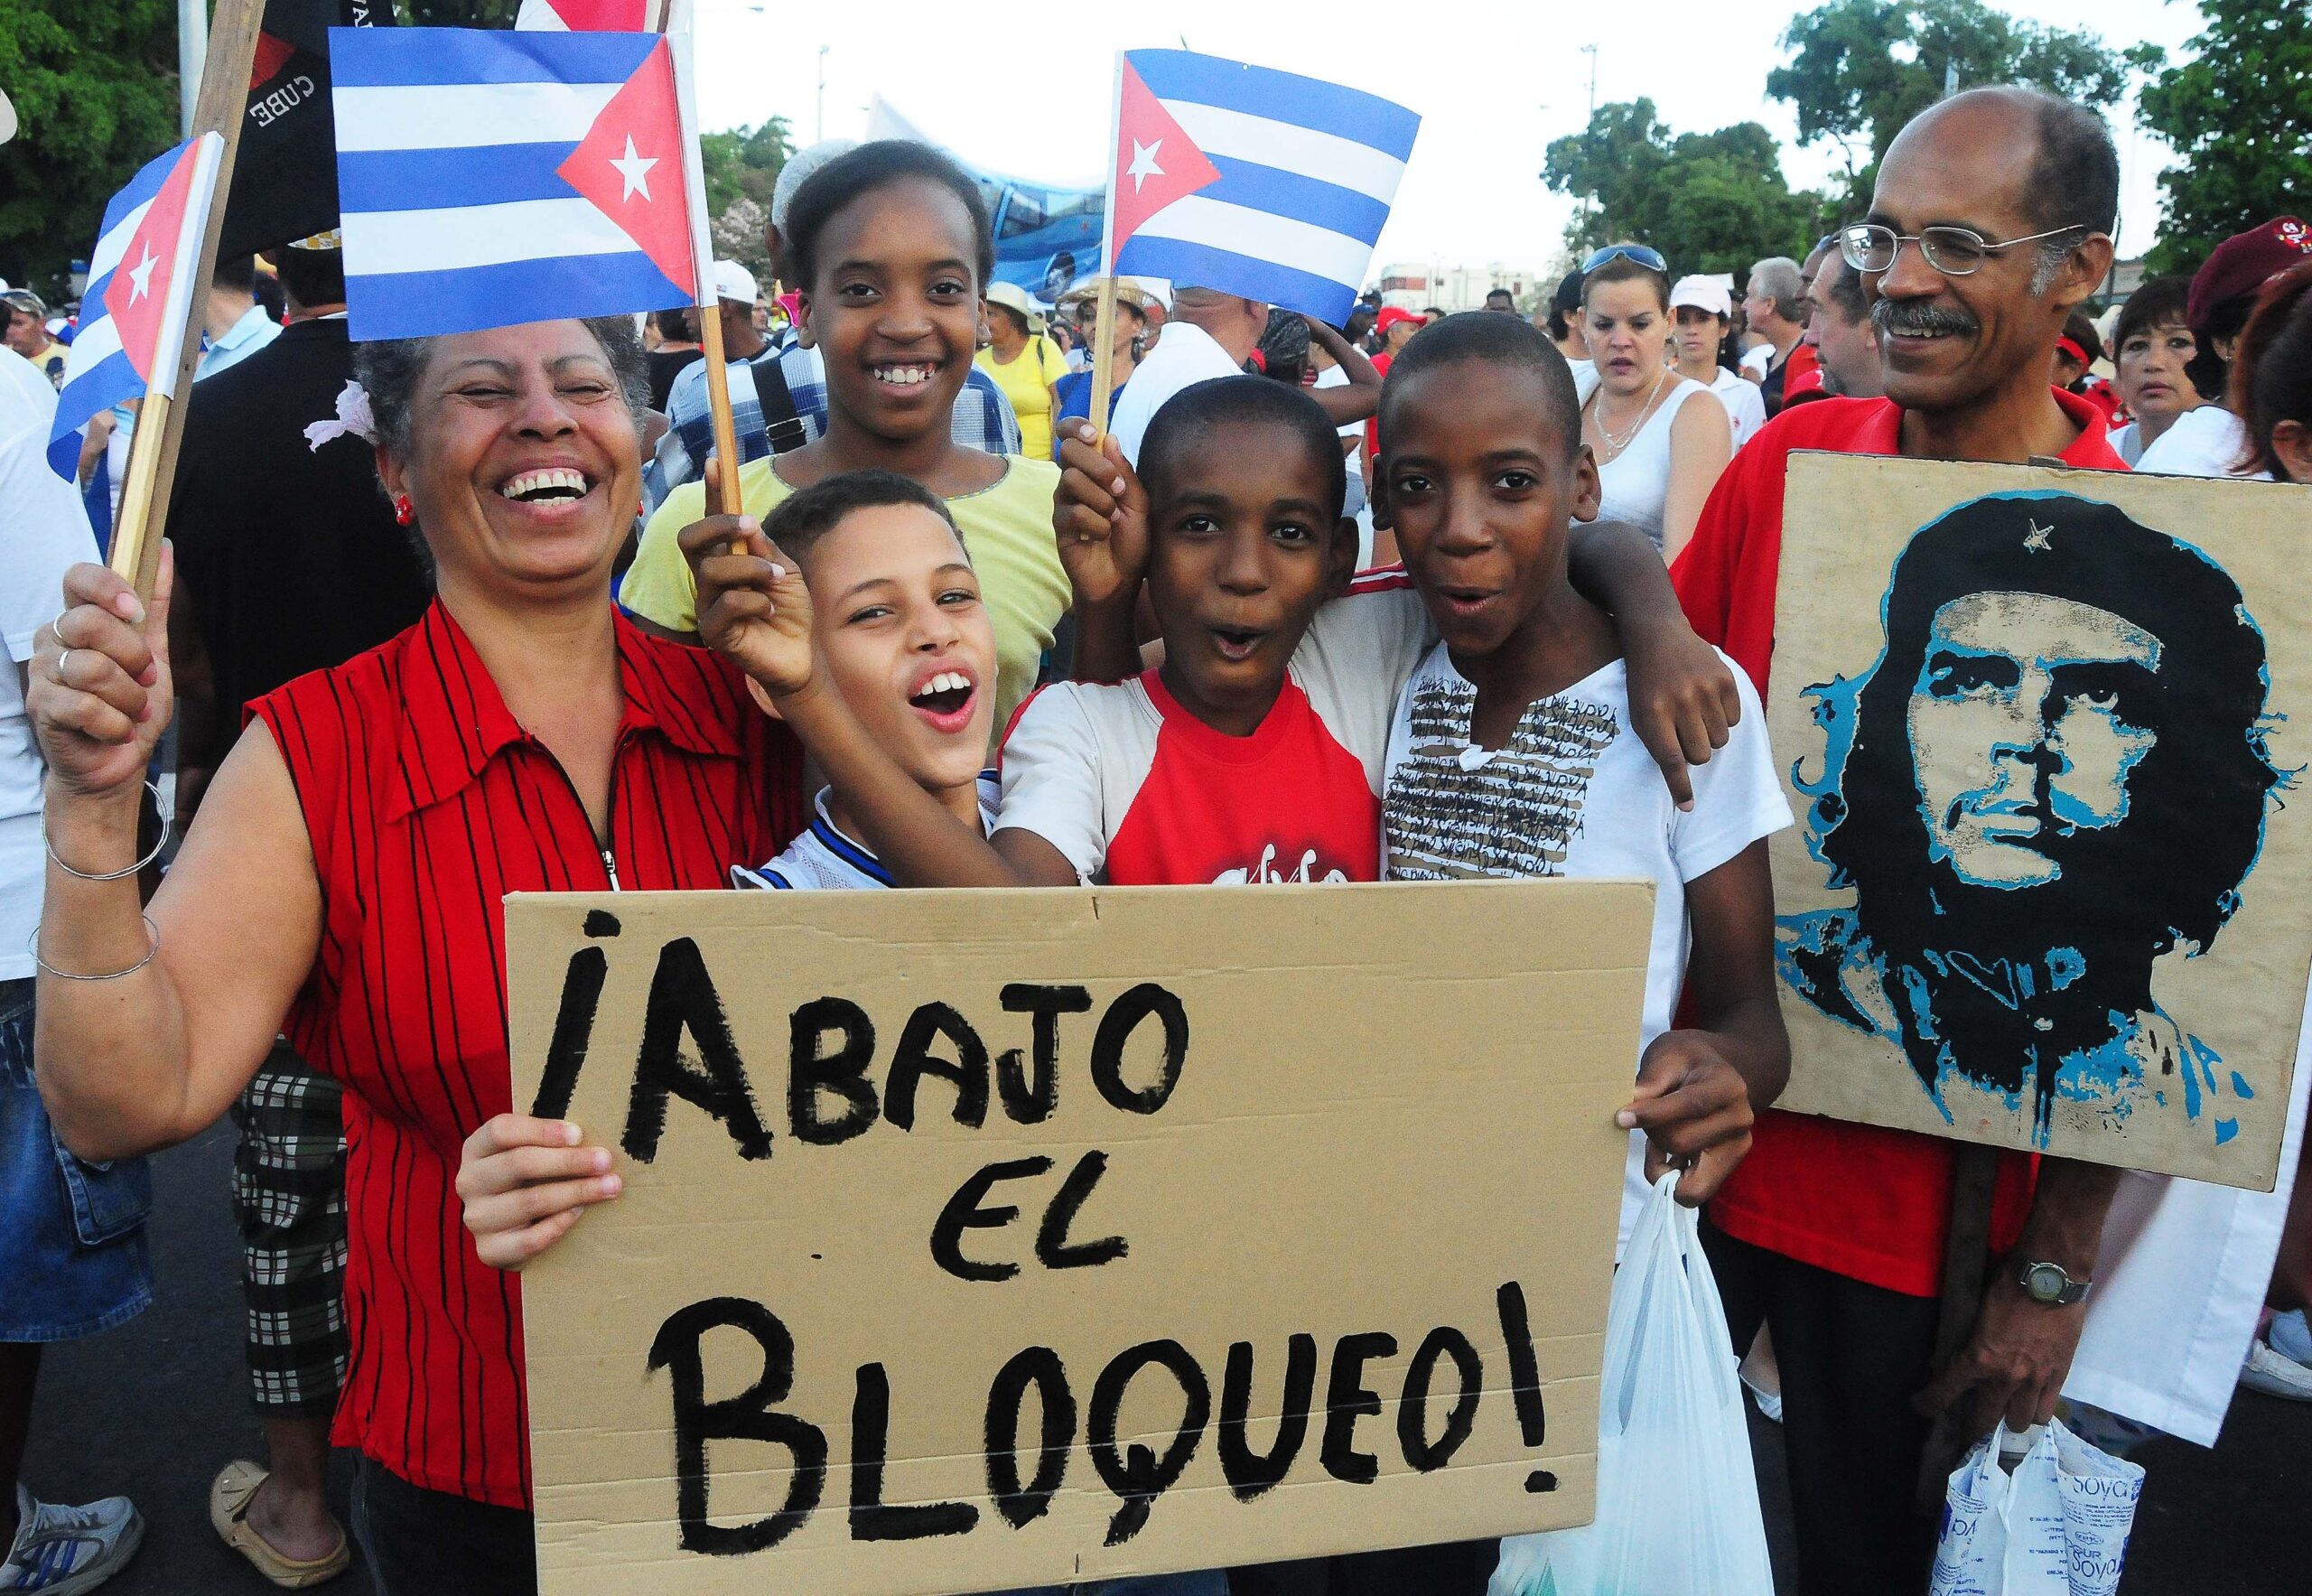 Cuba Grows and Advances Despite the Difficulties of 2021